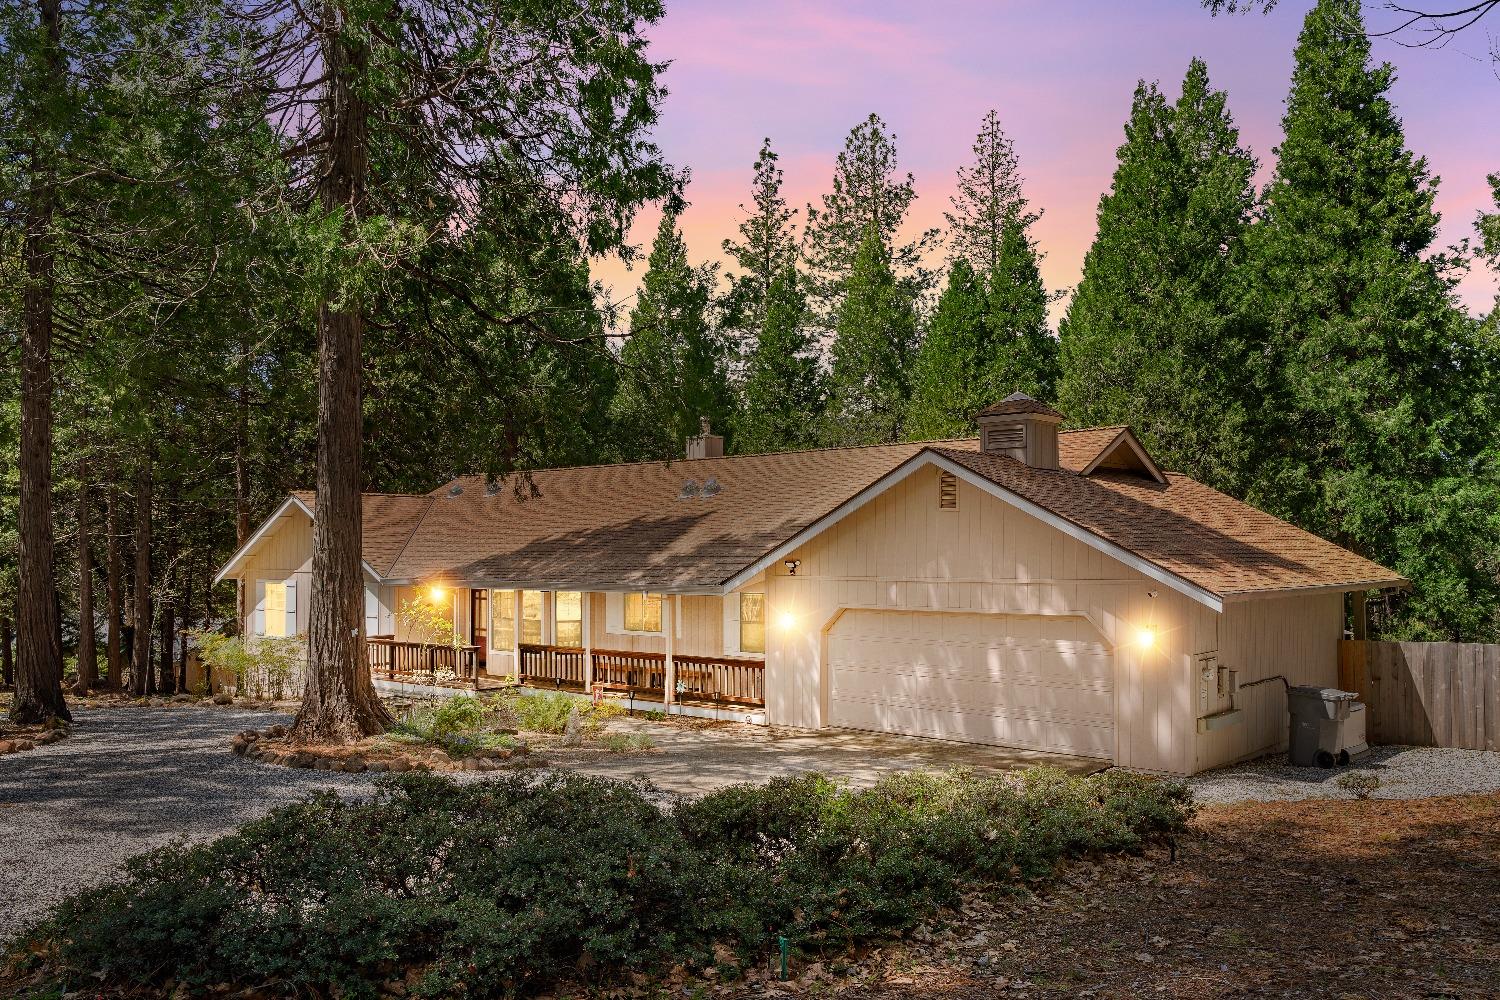 Photo of 11552 Side Hill Cir in Nevada City, CA